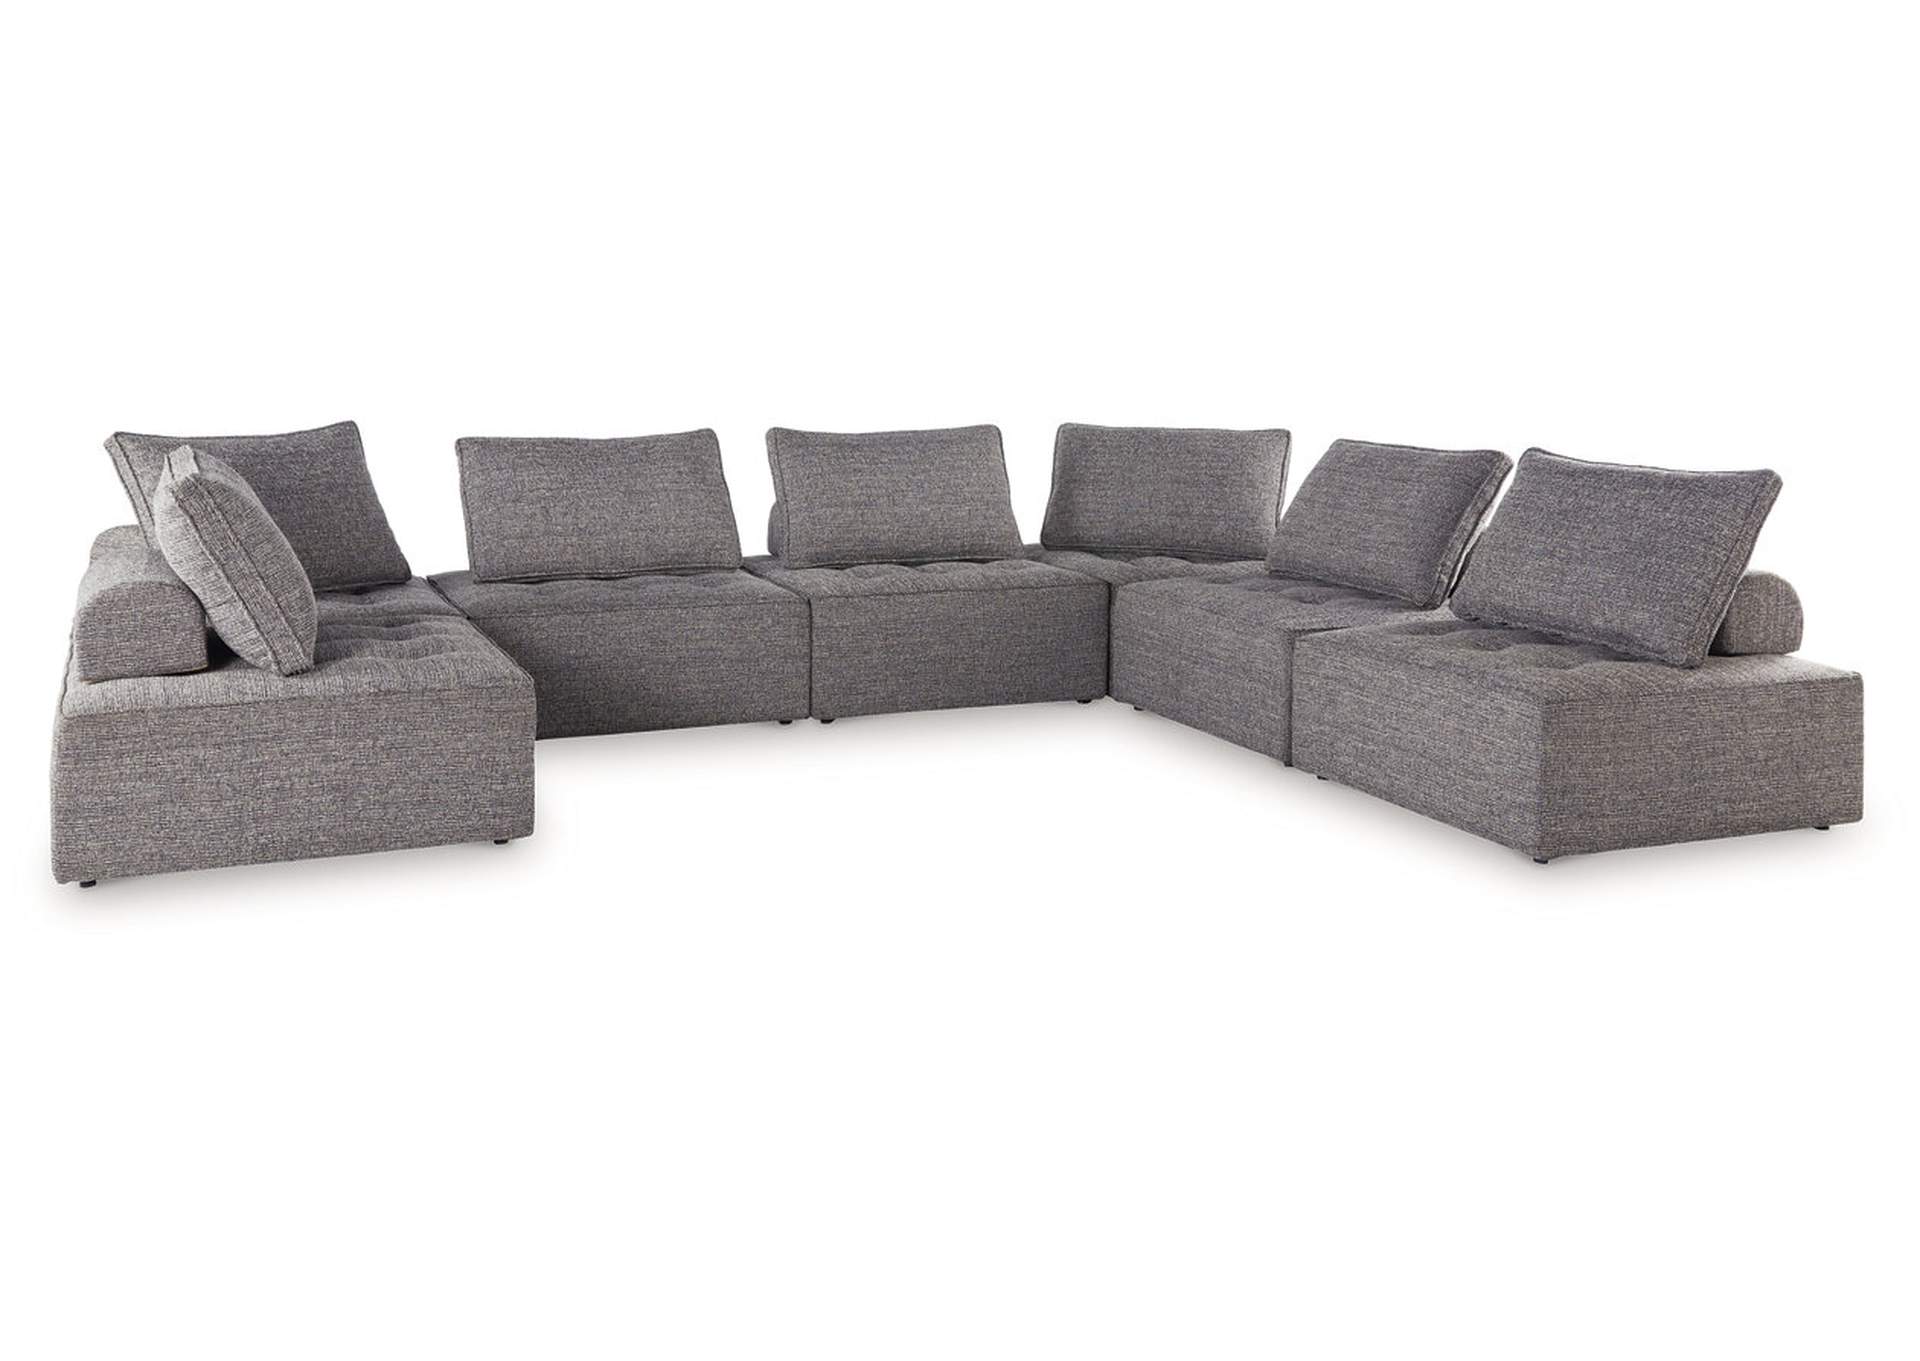 Bree Zee 7-Piece Outdoor Sectional,Outdoor By Ashley